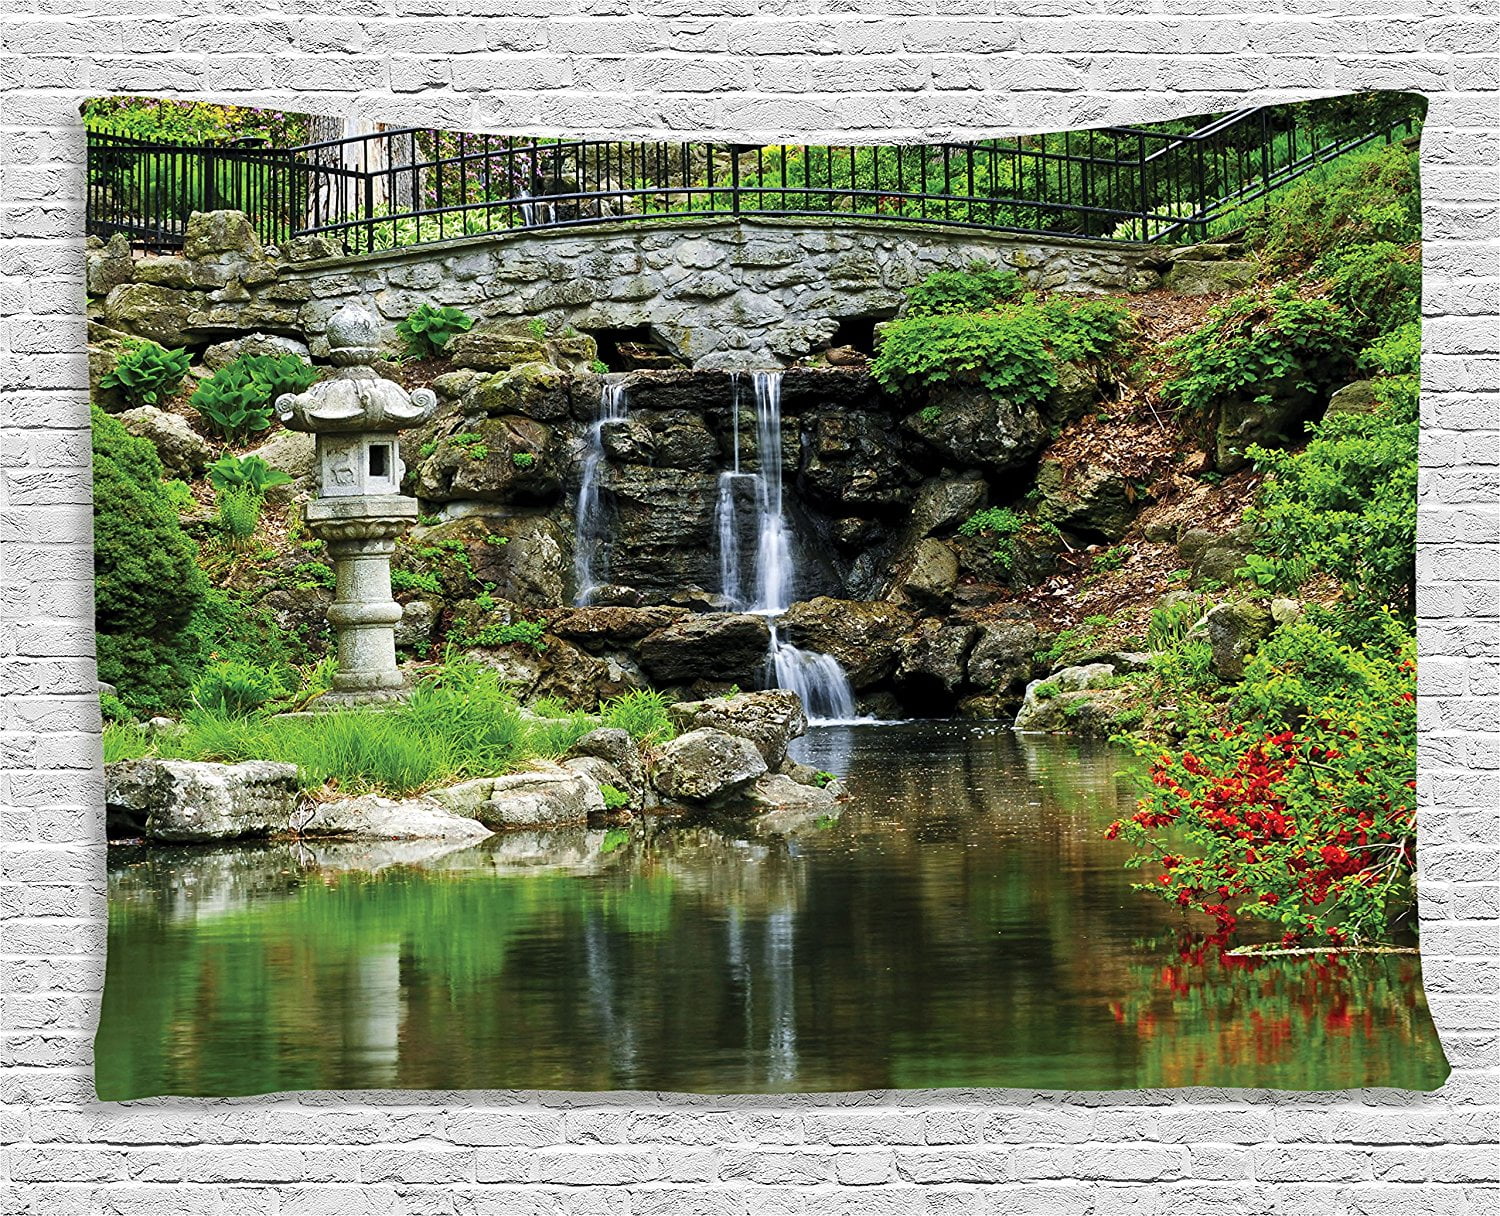 Details about   Lovely Nature Waterfall picture Print On Framed Canvas wall Art Home Decoration 